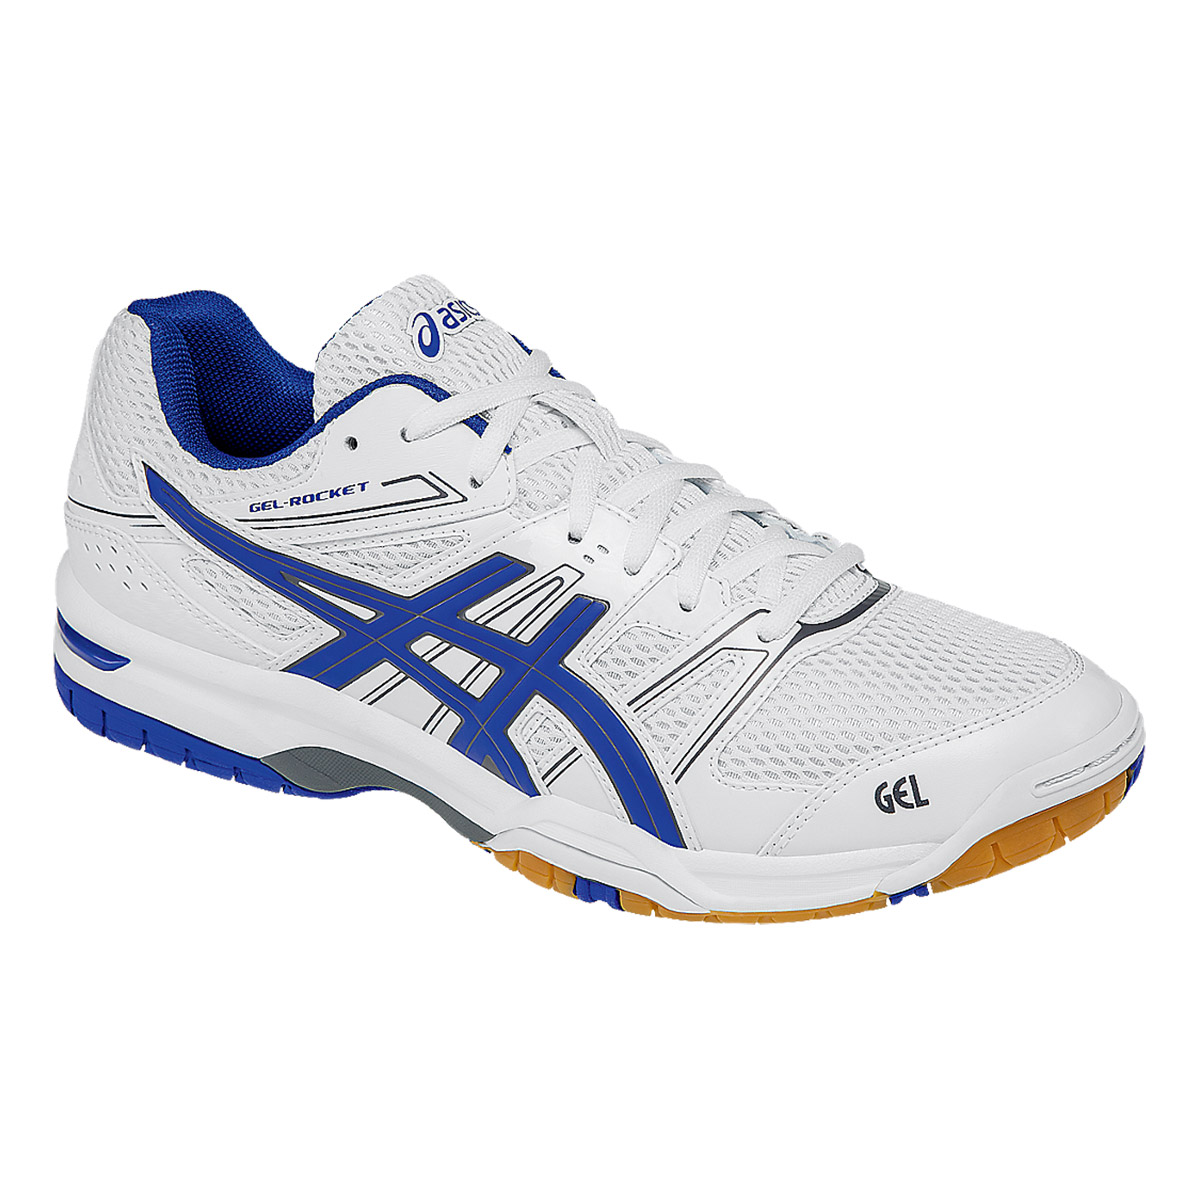 asics sneakers online india,OFF 79 